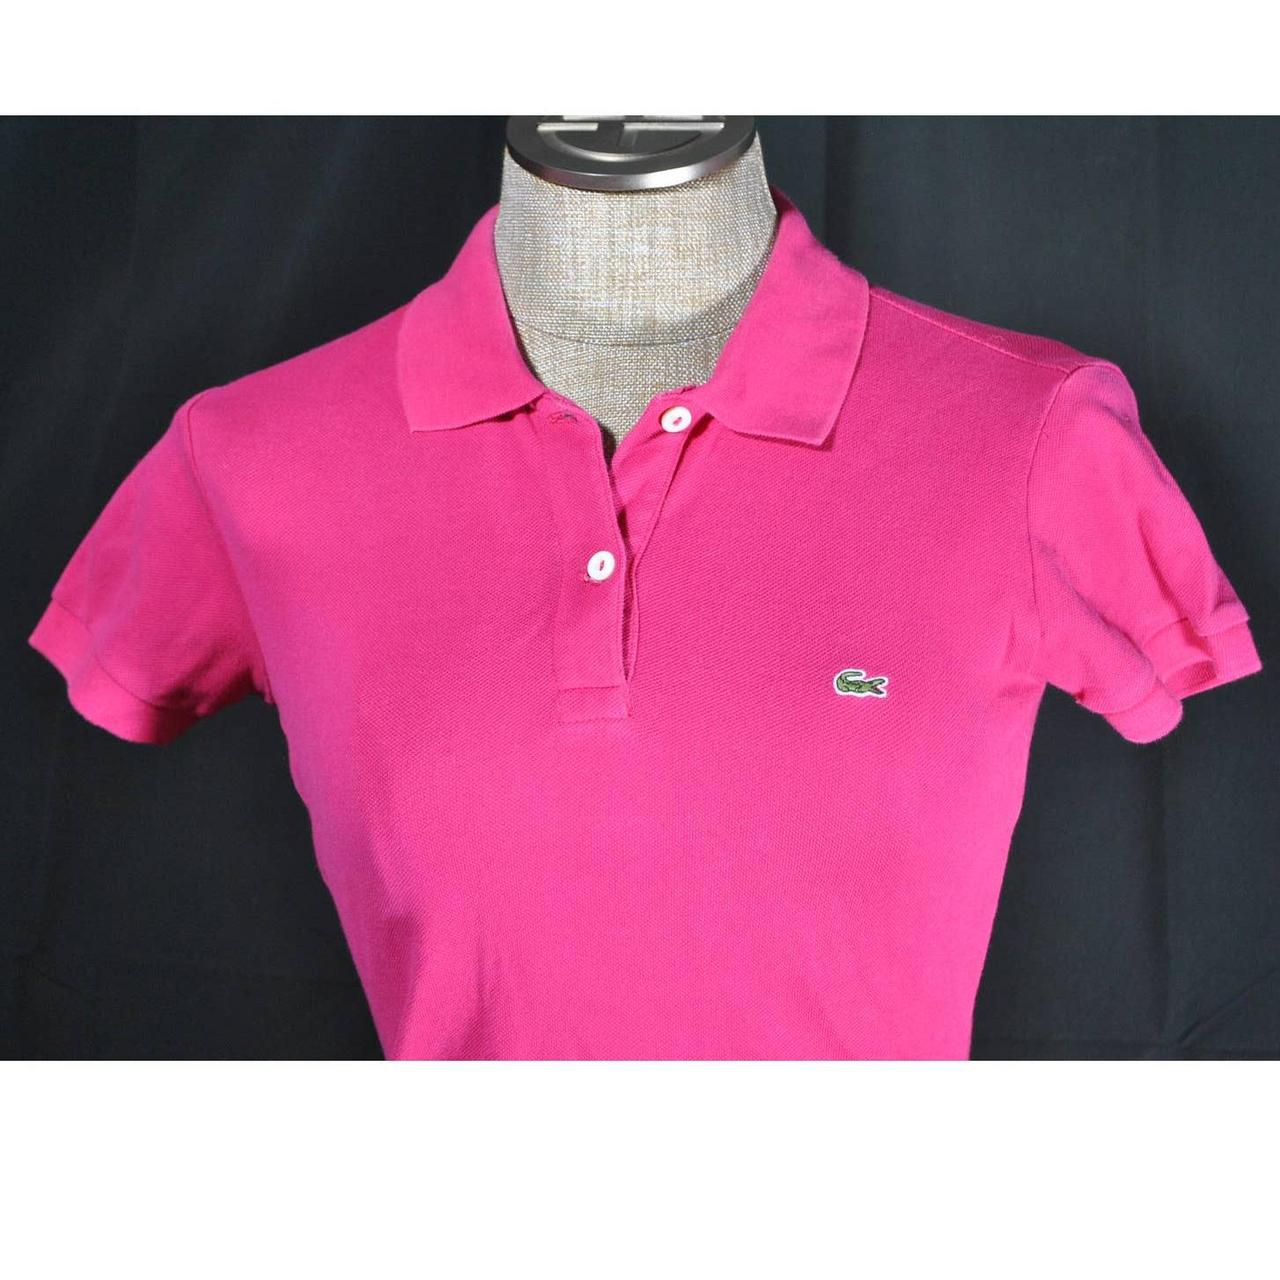 Product Image 2 - Lacoste Pink Cap Sleeve Pique